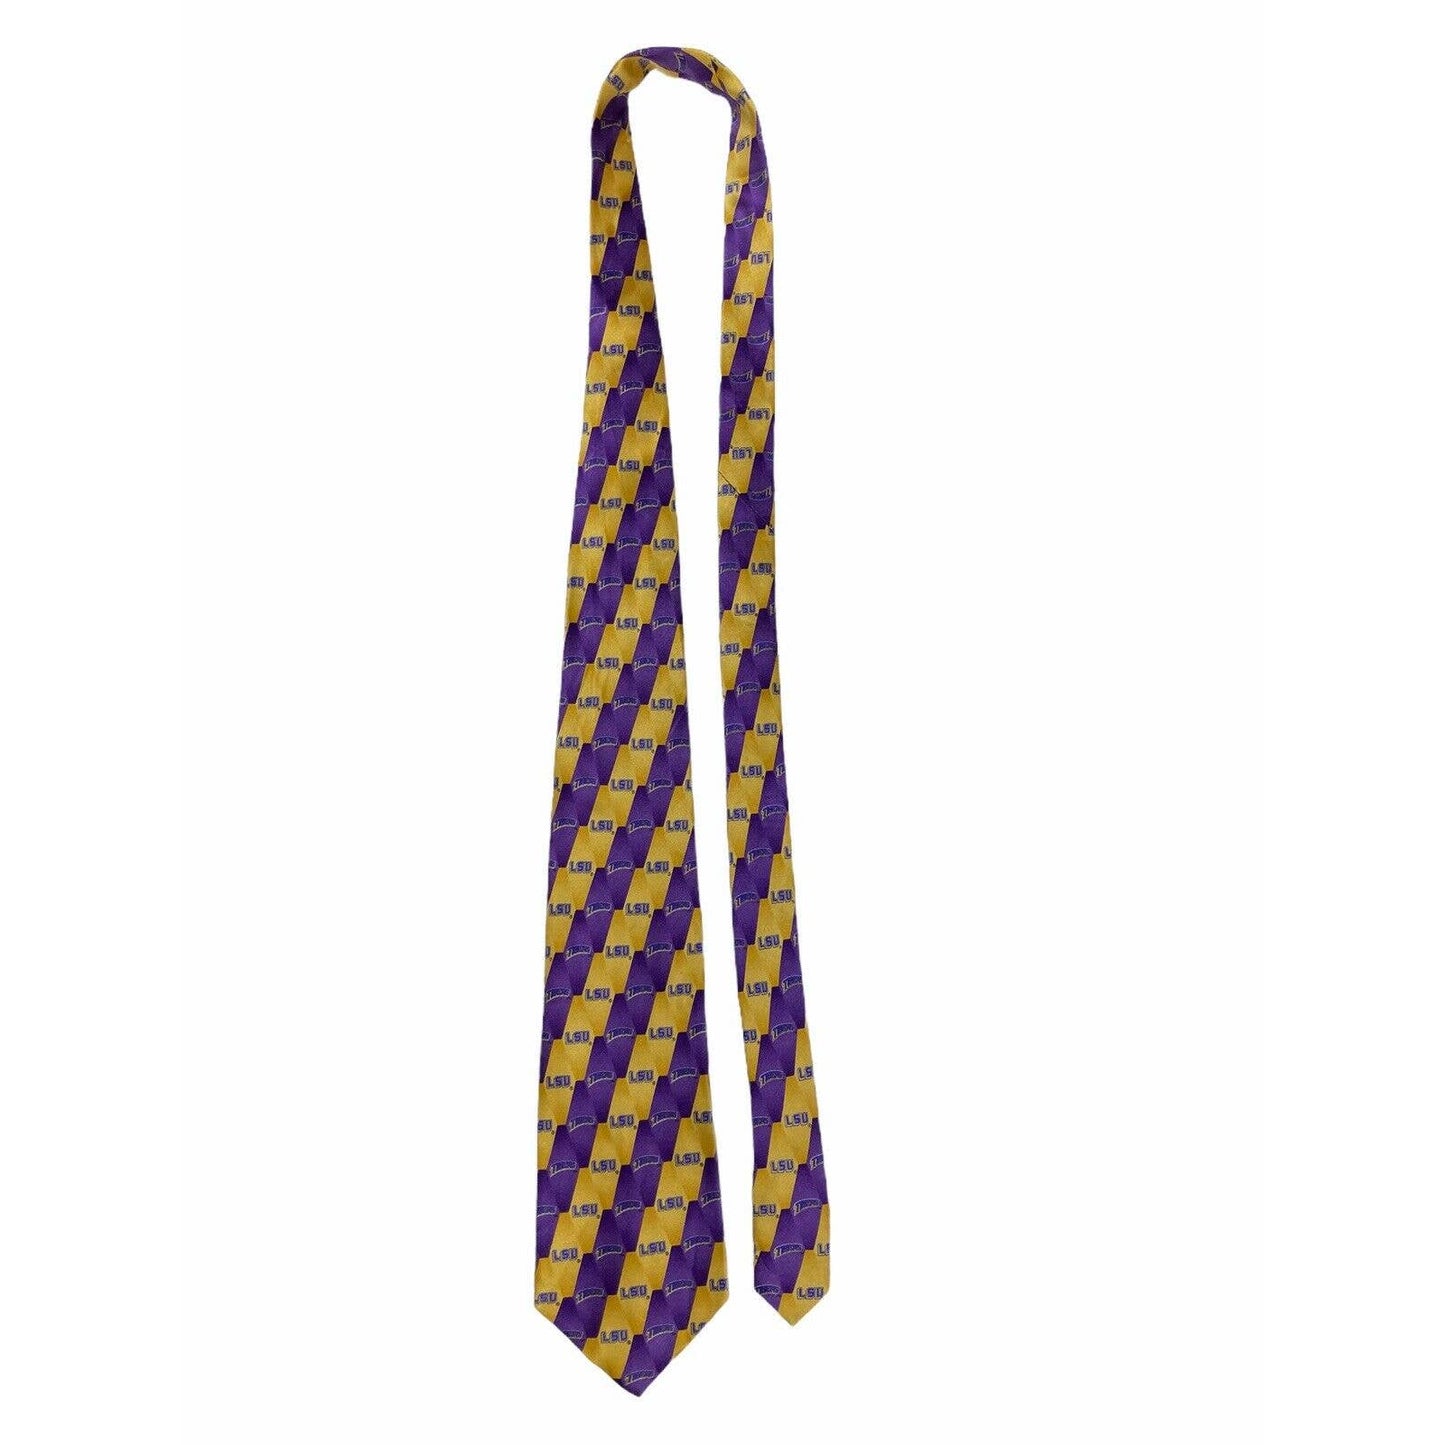 NWOT LSU TIGERS WOVEN CHECKERED LOGO SILK NECKTIE Purple Gold Eagles Wings